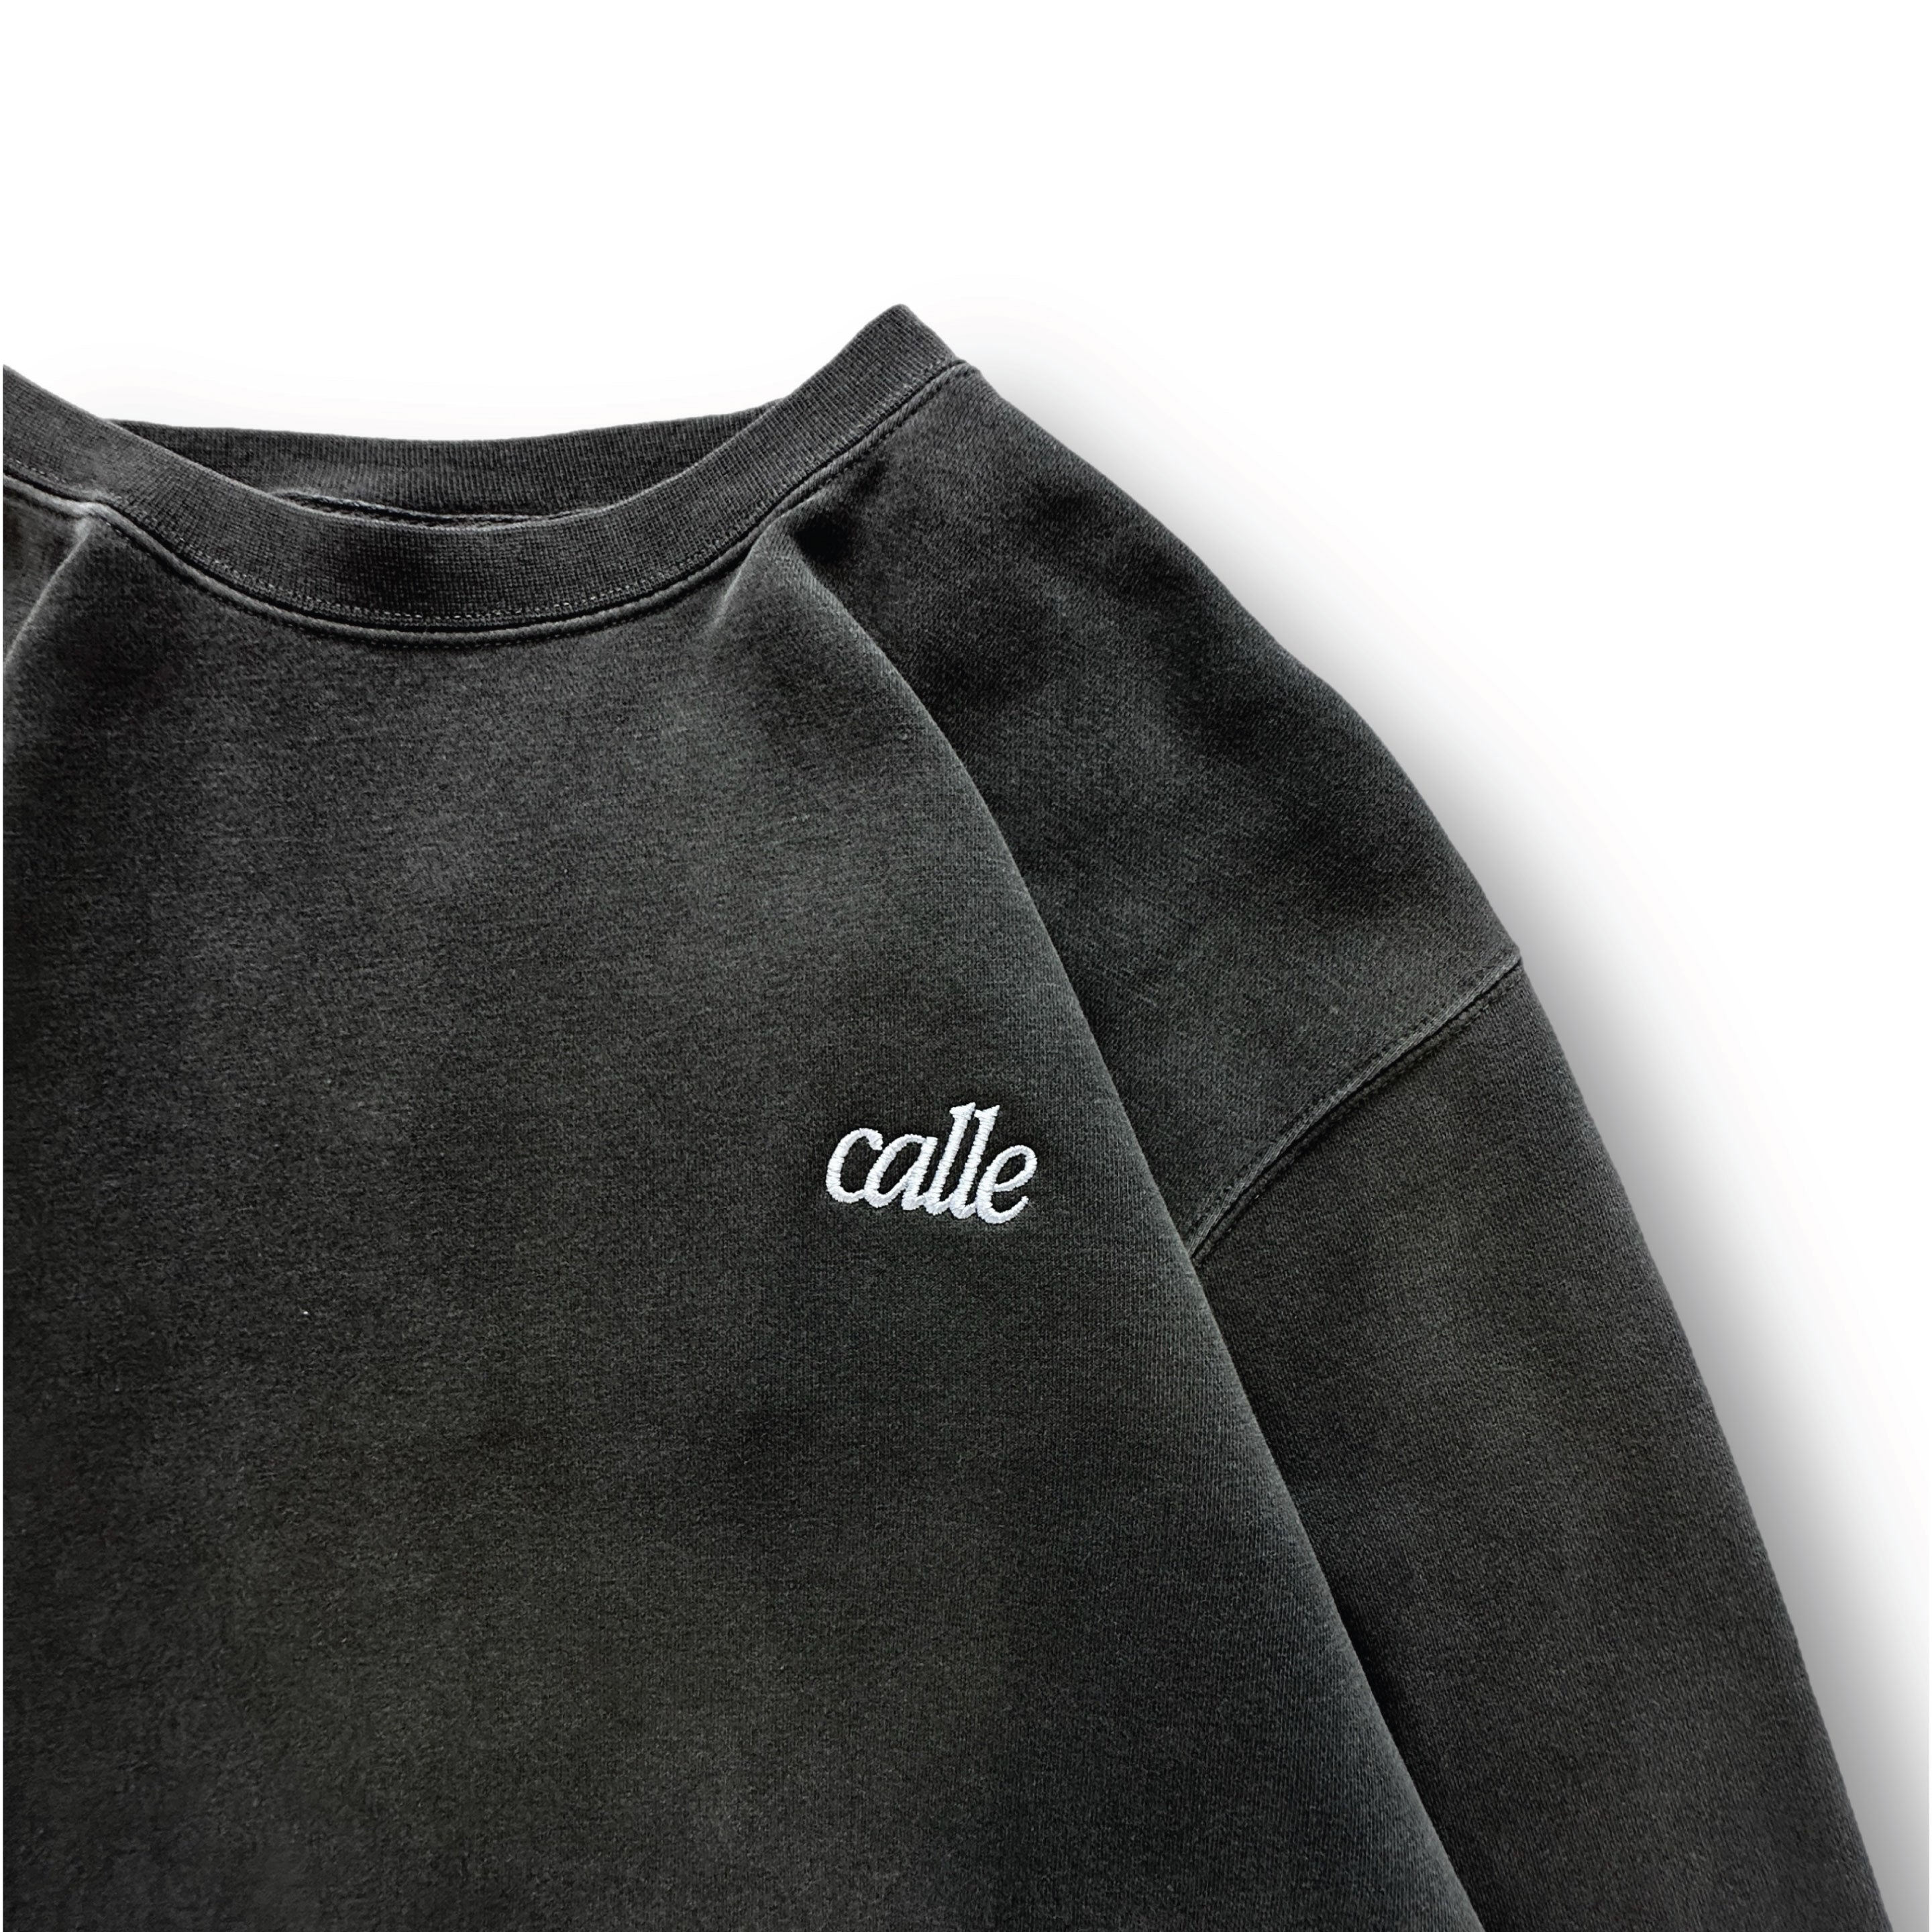 Faded Embroidered Calle Crew - Charcoal